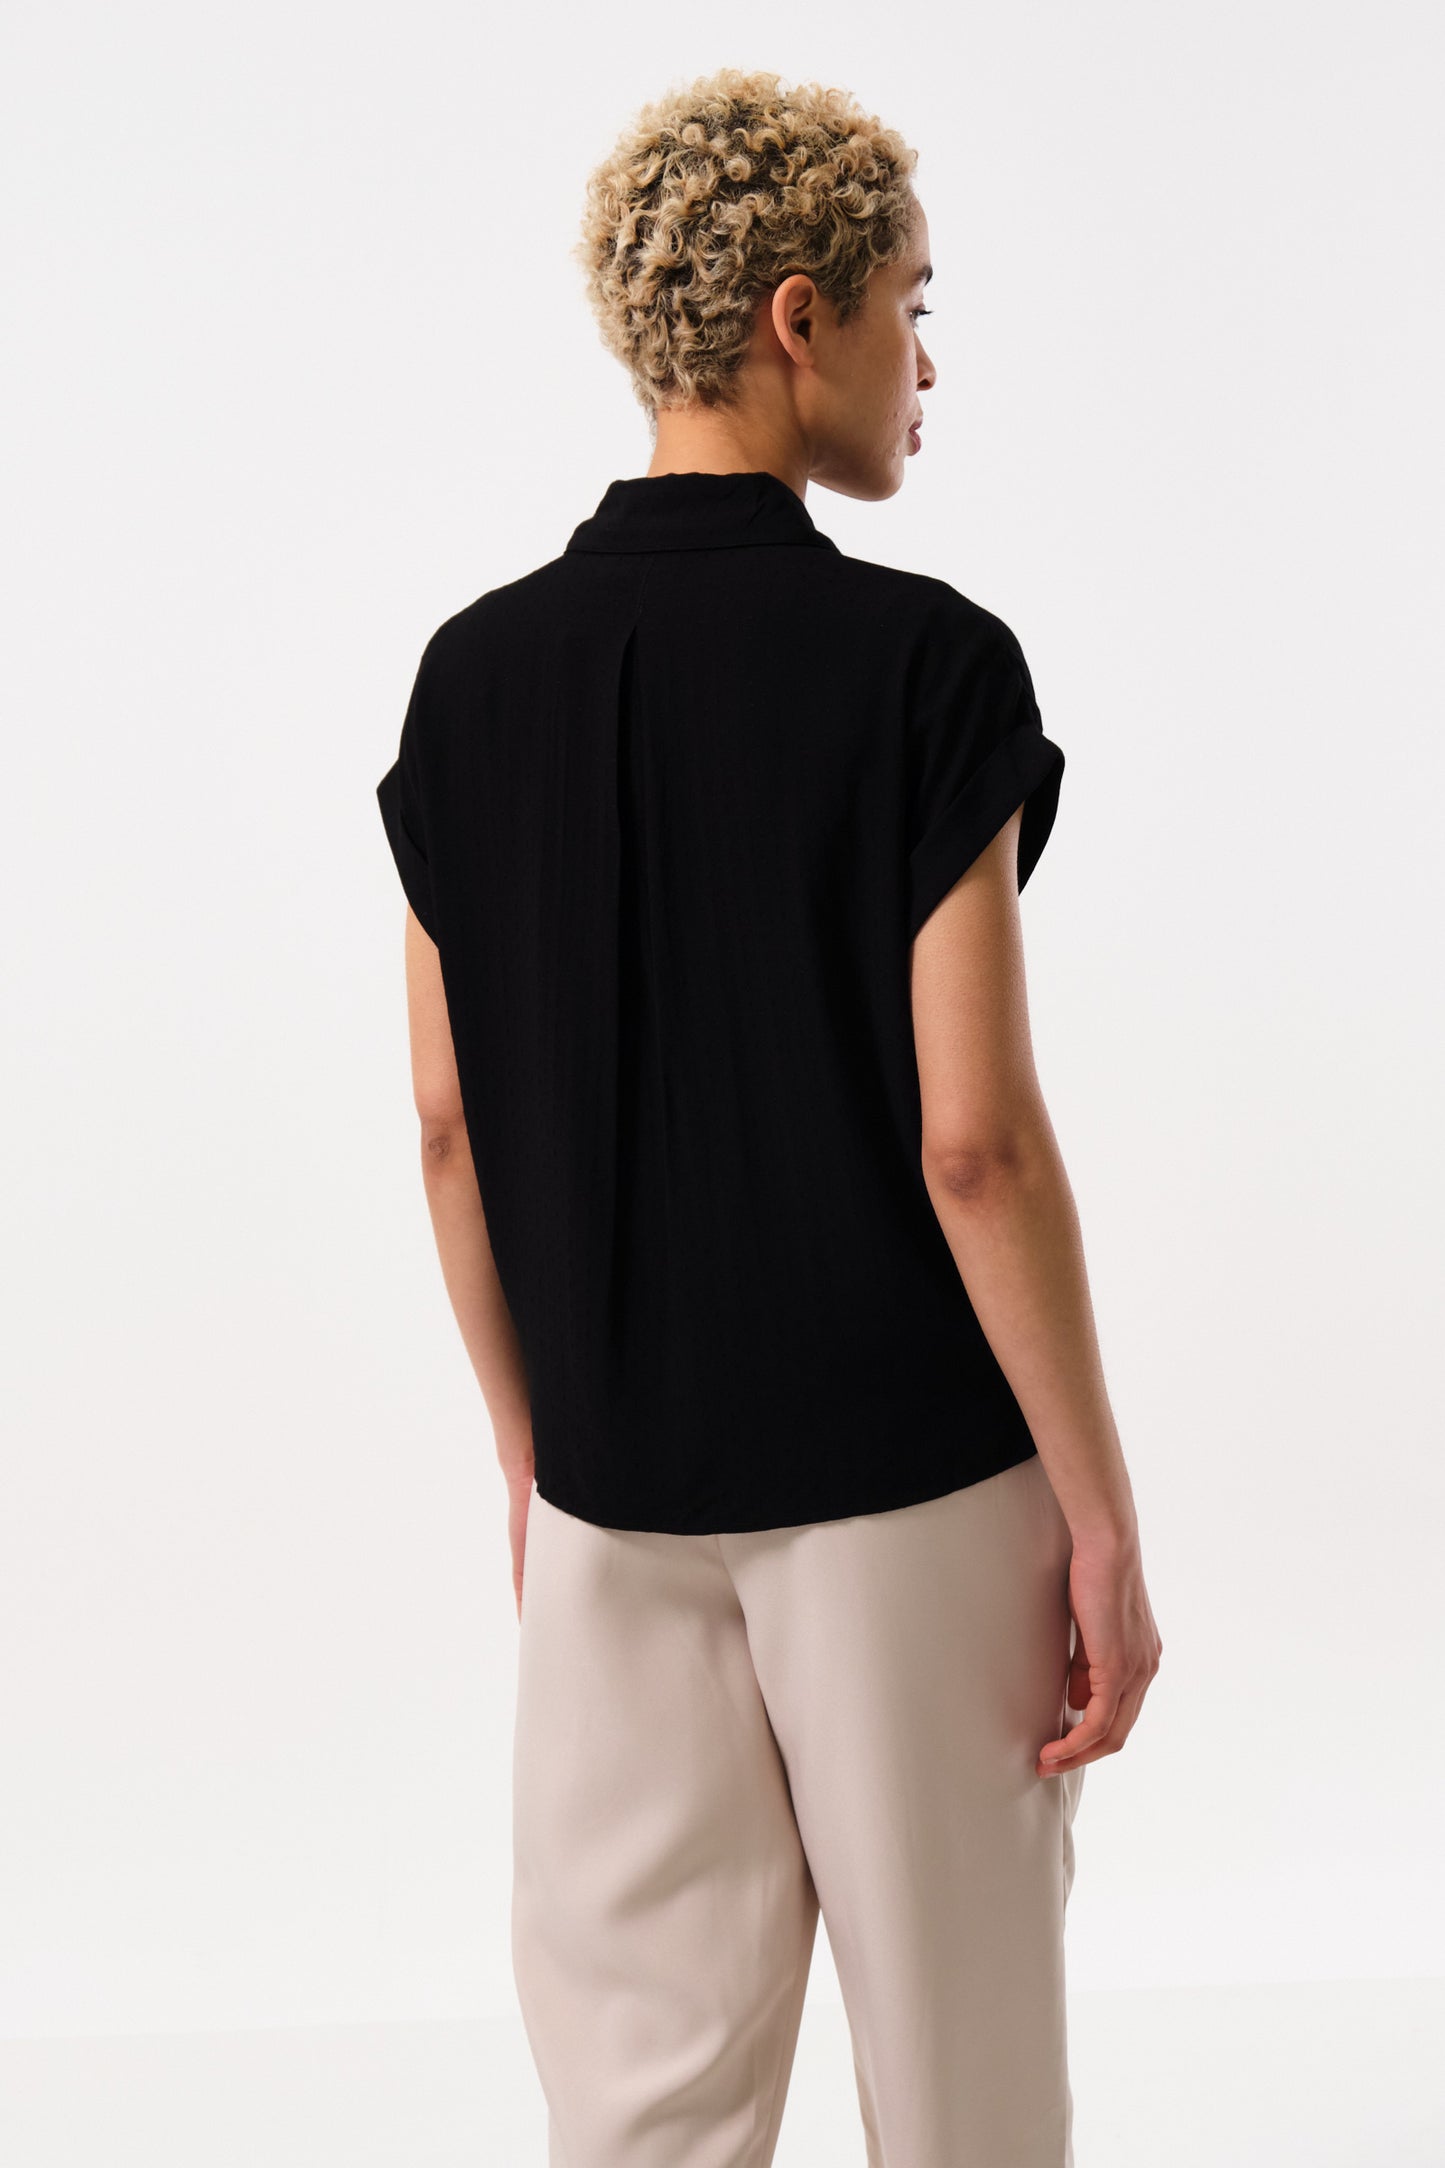 Black Short Sleeved Shirt with Collar